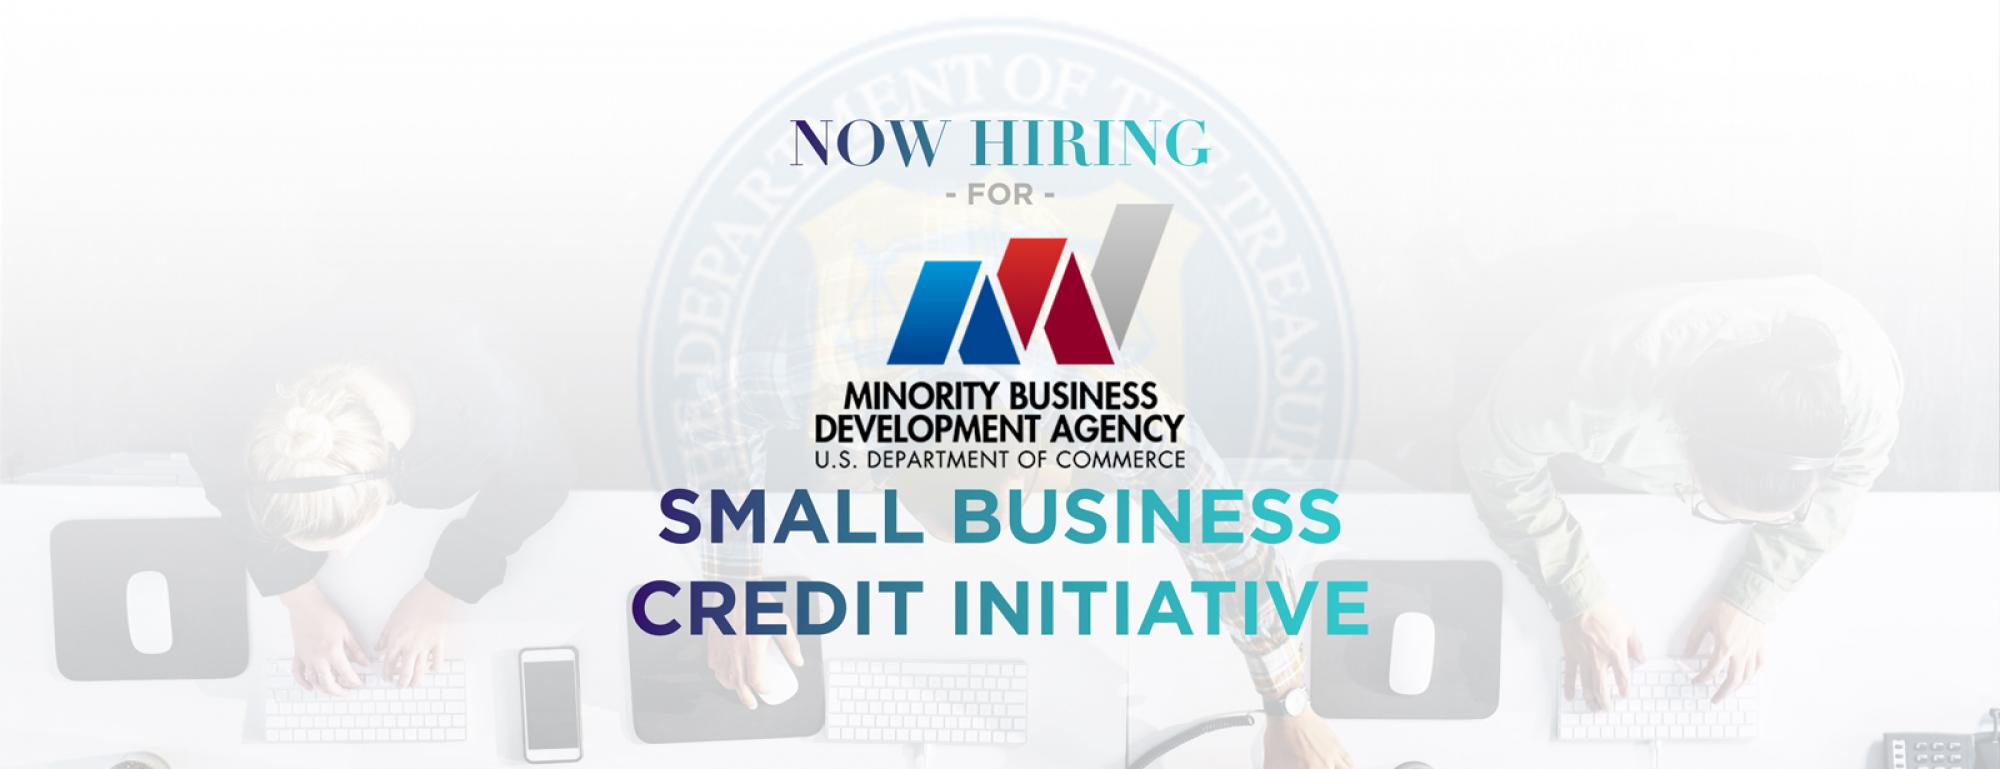 Now Hiring for MBDA's Small Business Credit Initiative 